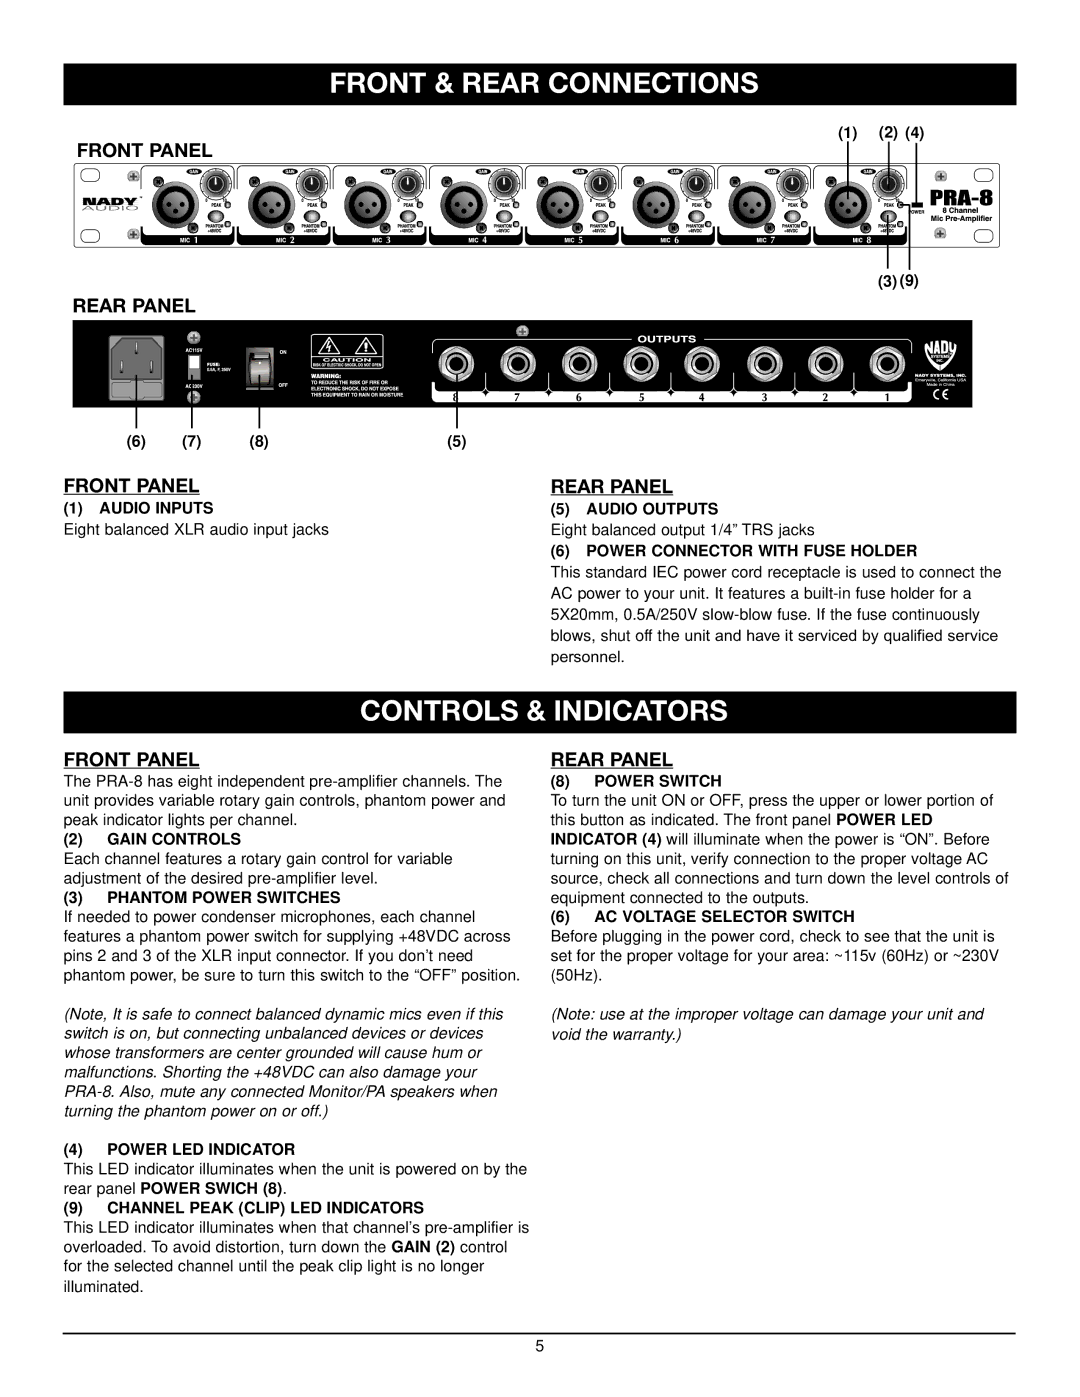 Nady Systems PRA-8 owner manual Front & Rear Connections, Controls & Indicators, Front Panel Rear Panel 